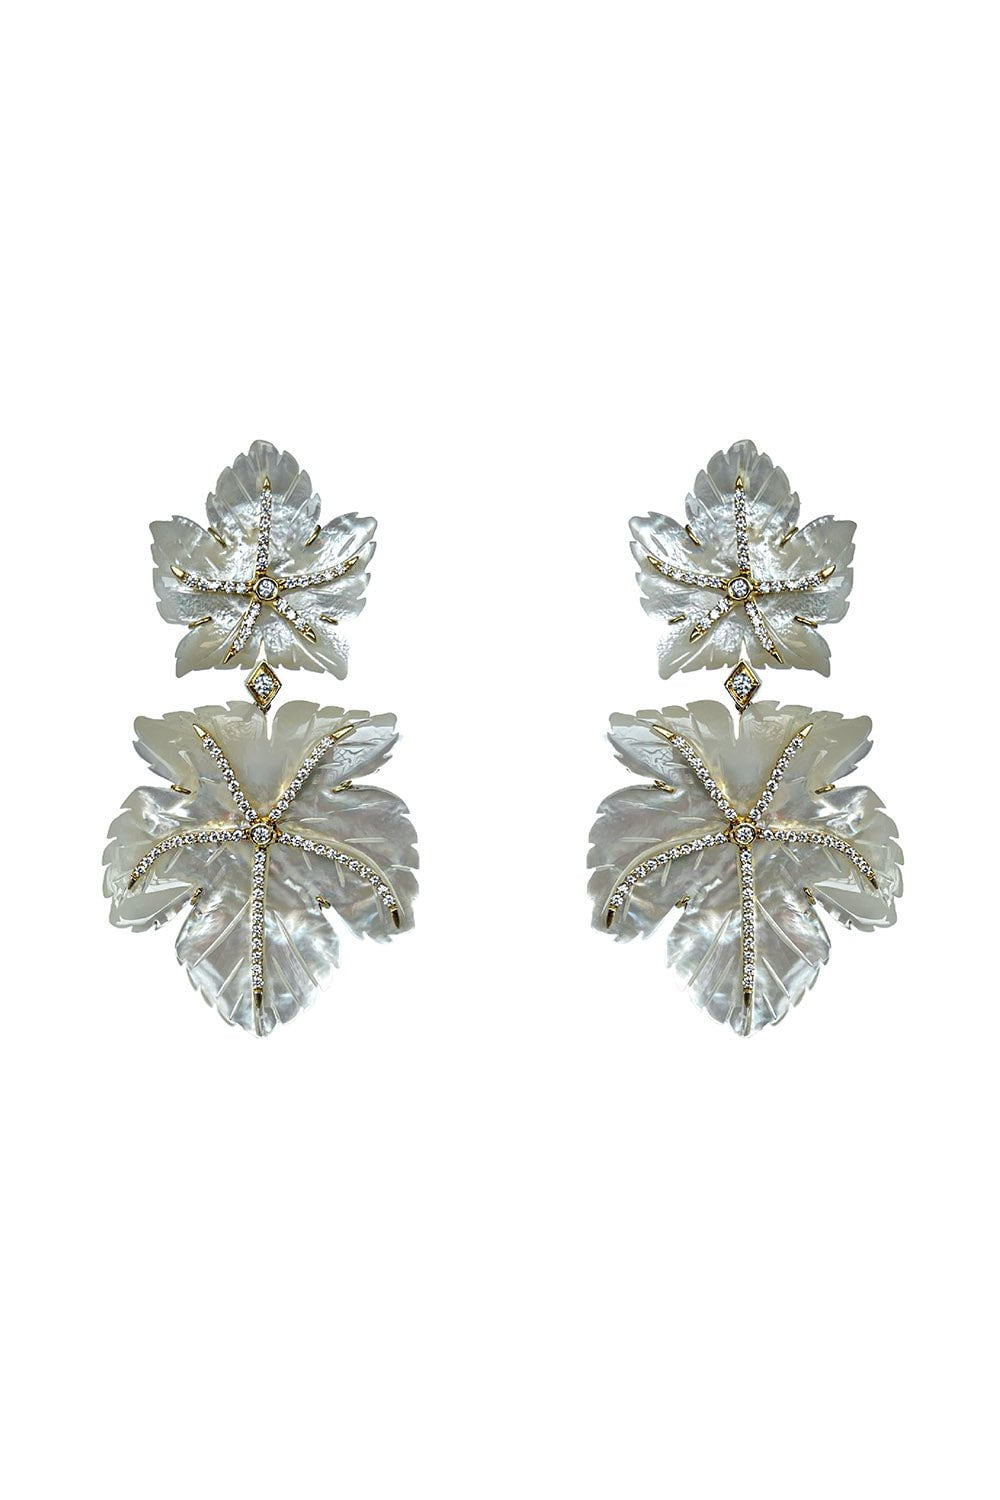 CASA CASTRO-Double Leaf Pearl Mother Nature Earrings-YELLOW GOLD